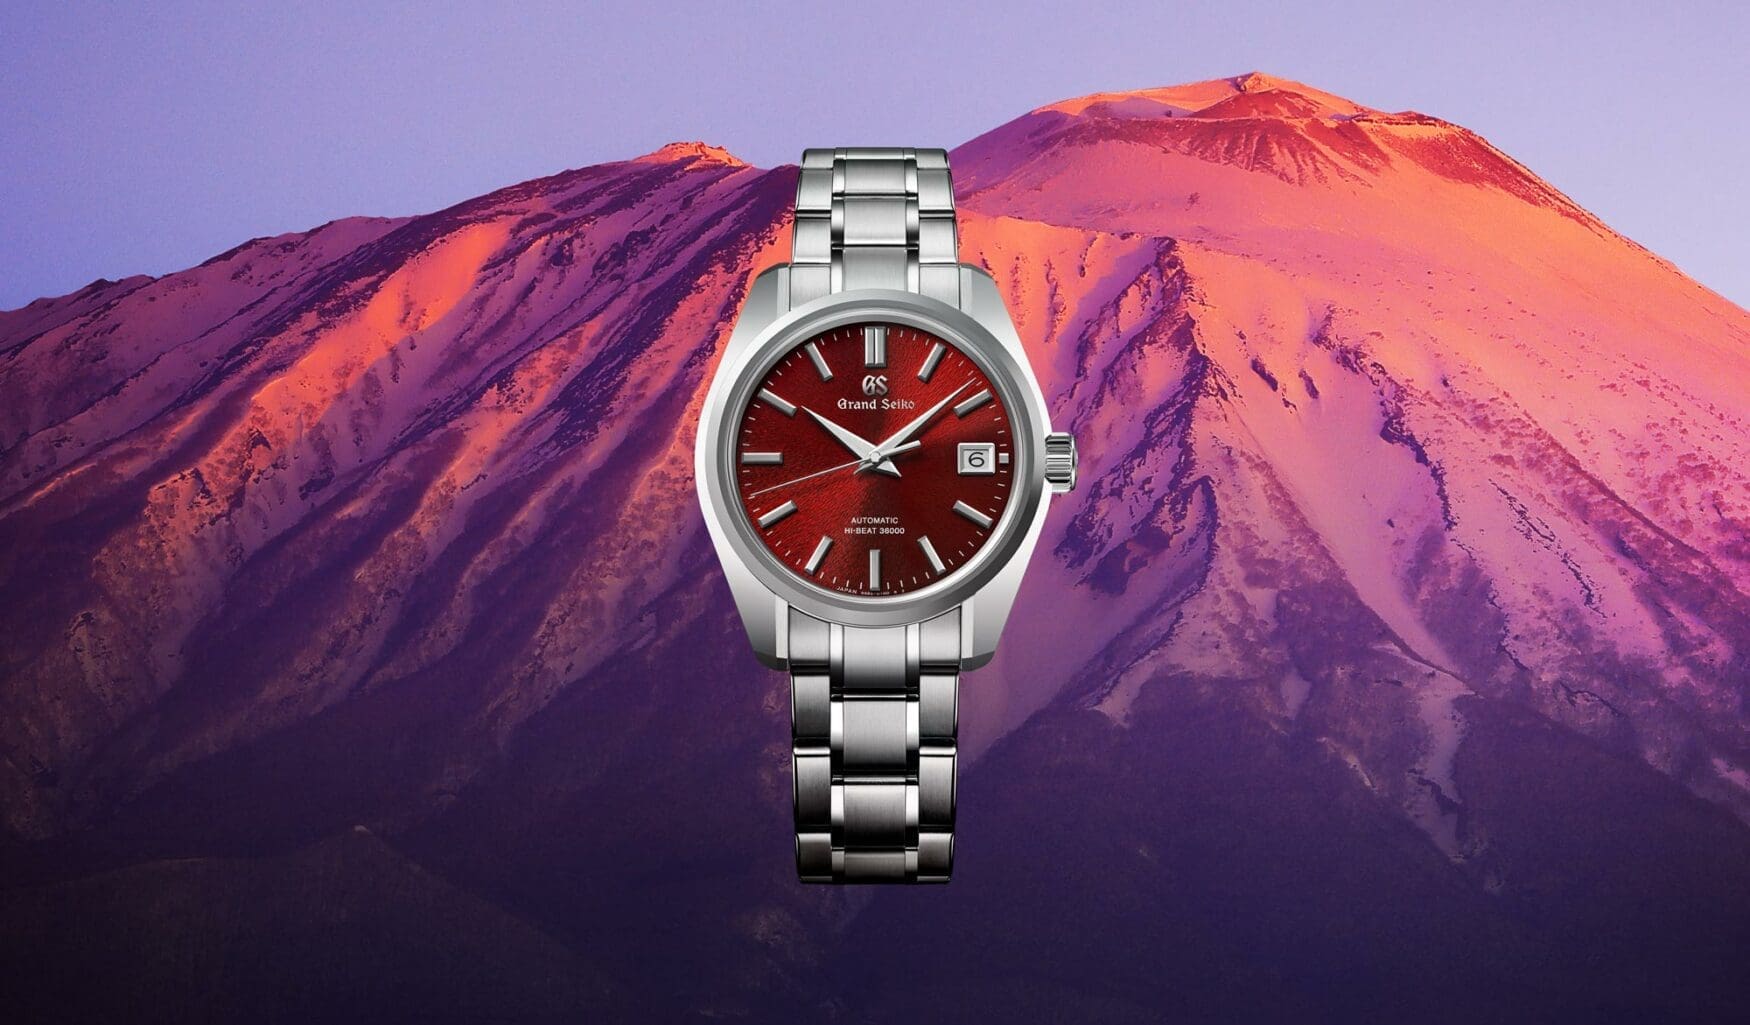 The Grand Seiko SBGH345 is a new Ever-Brilliant Steel online exclusive with a red Mt. Iwate dial